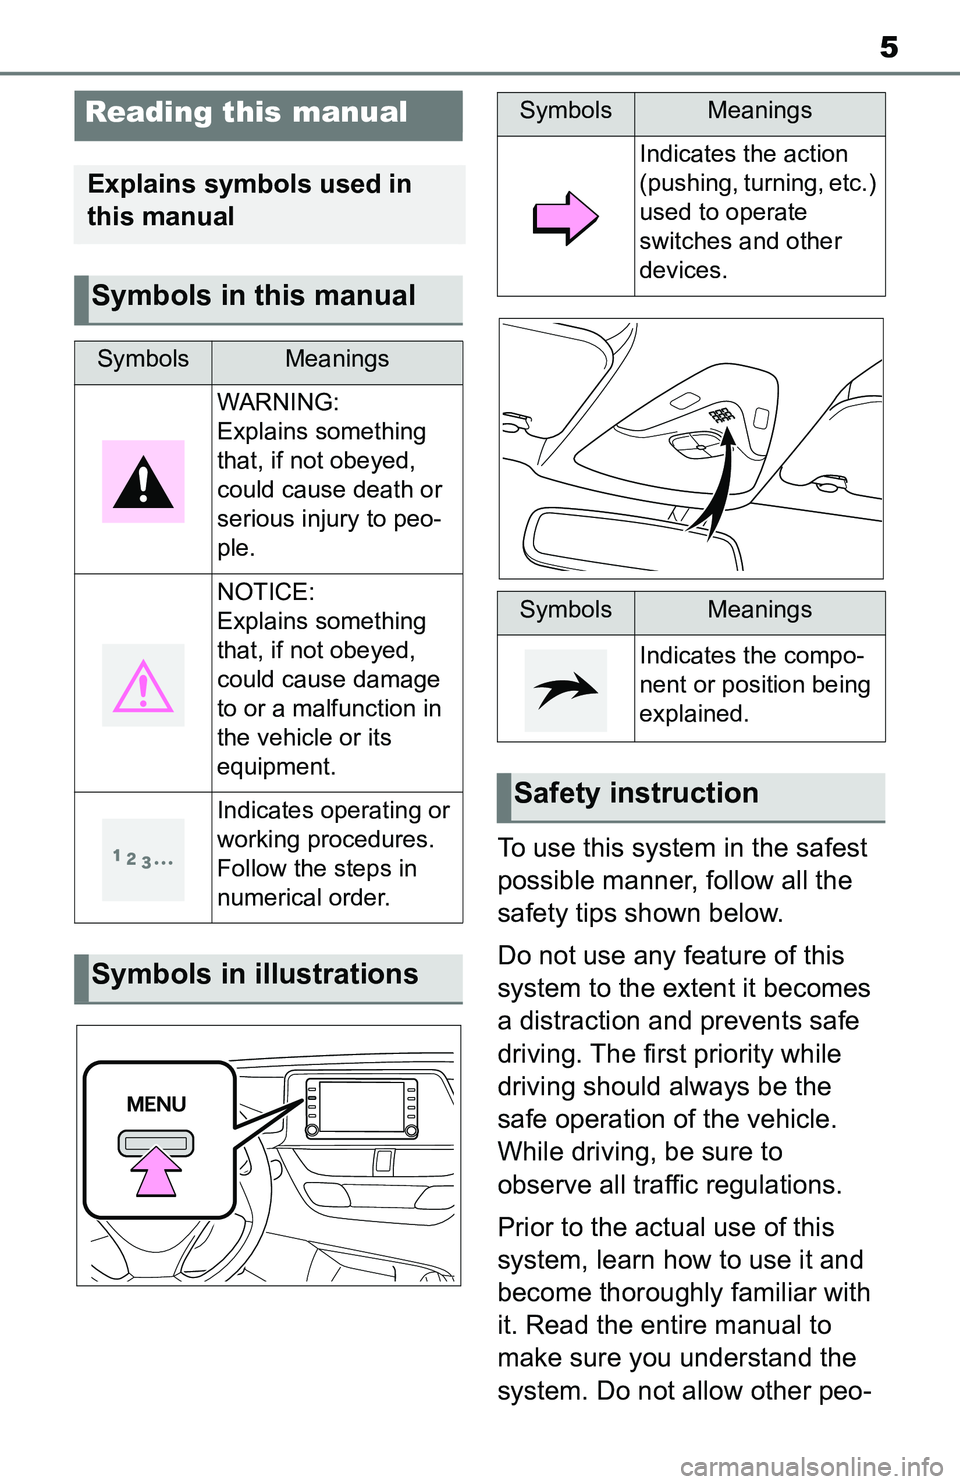 TOYOTA C-HR 2021  Accessories, Audio & Navigation (in English) 5
To use this system in the safest 
possible manner, follow all the 
safety tips shown below.
Do not use any feature of this 
system to the extent it becomes 
a distraction and prevents safe 
driving.